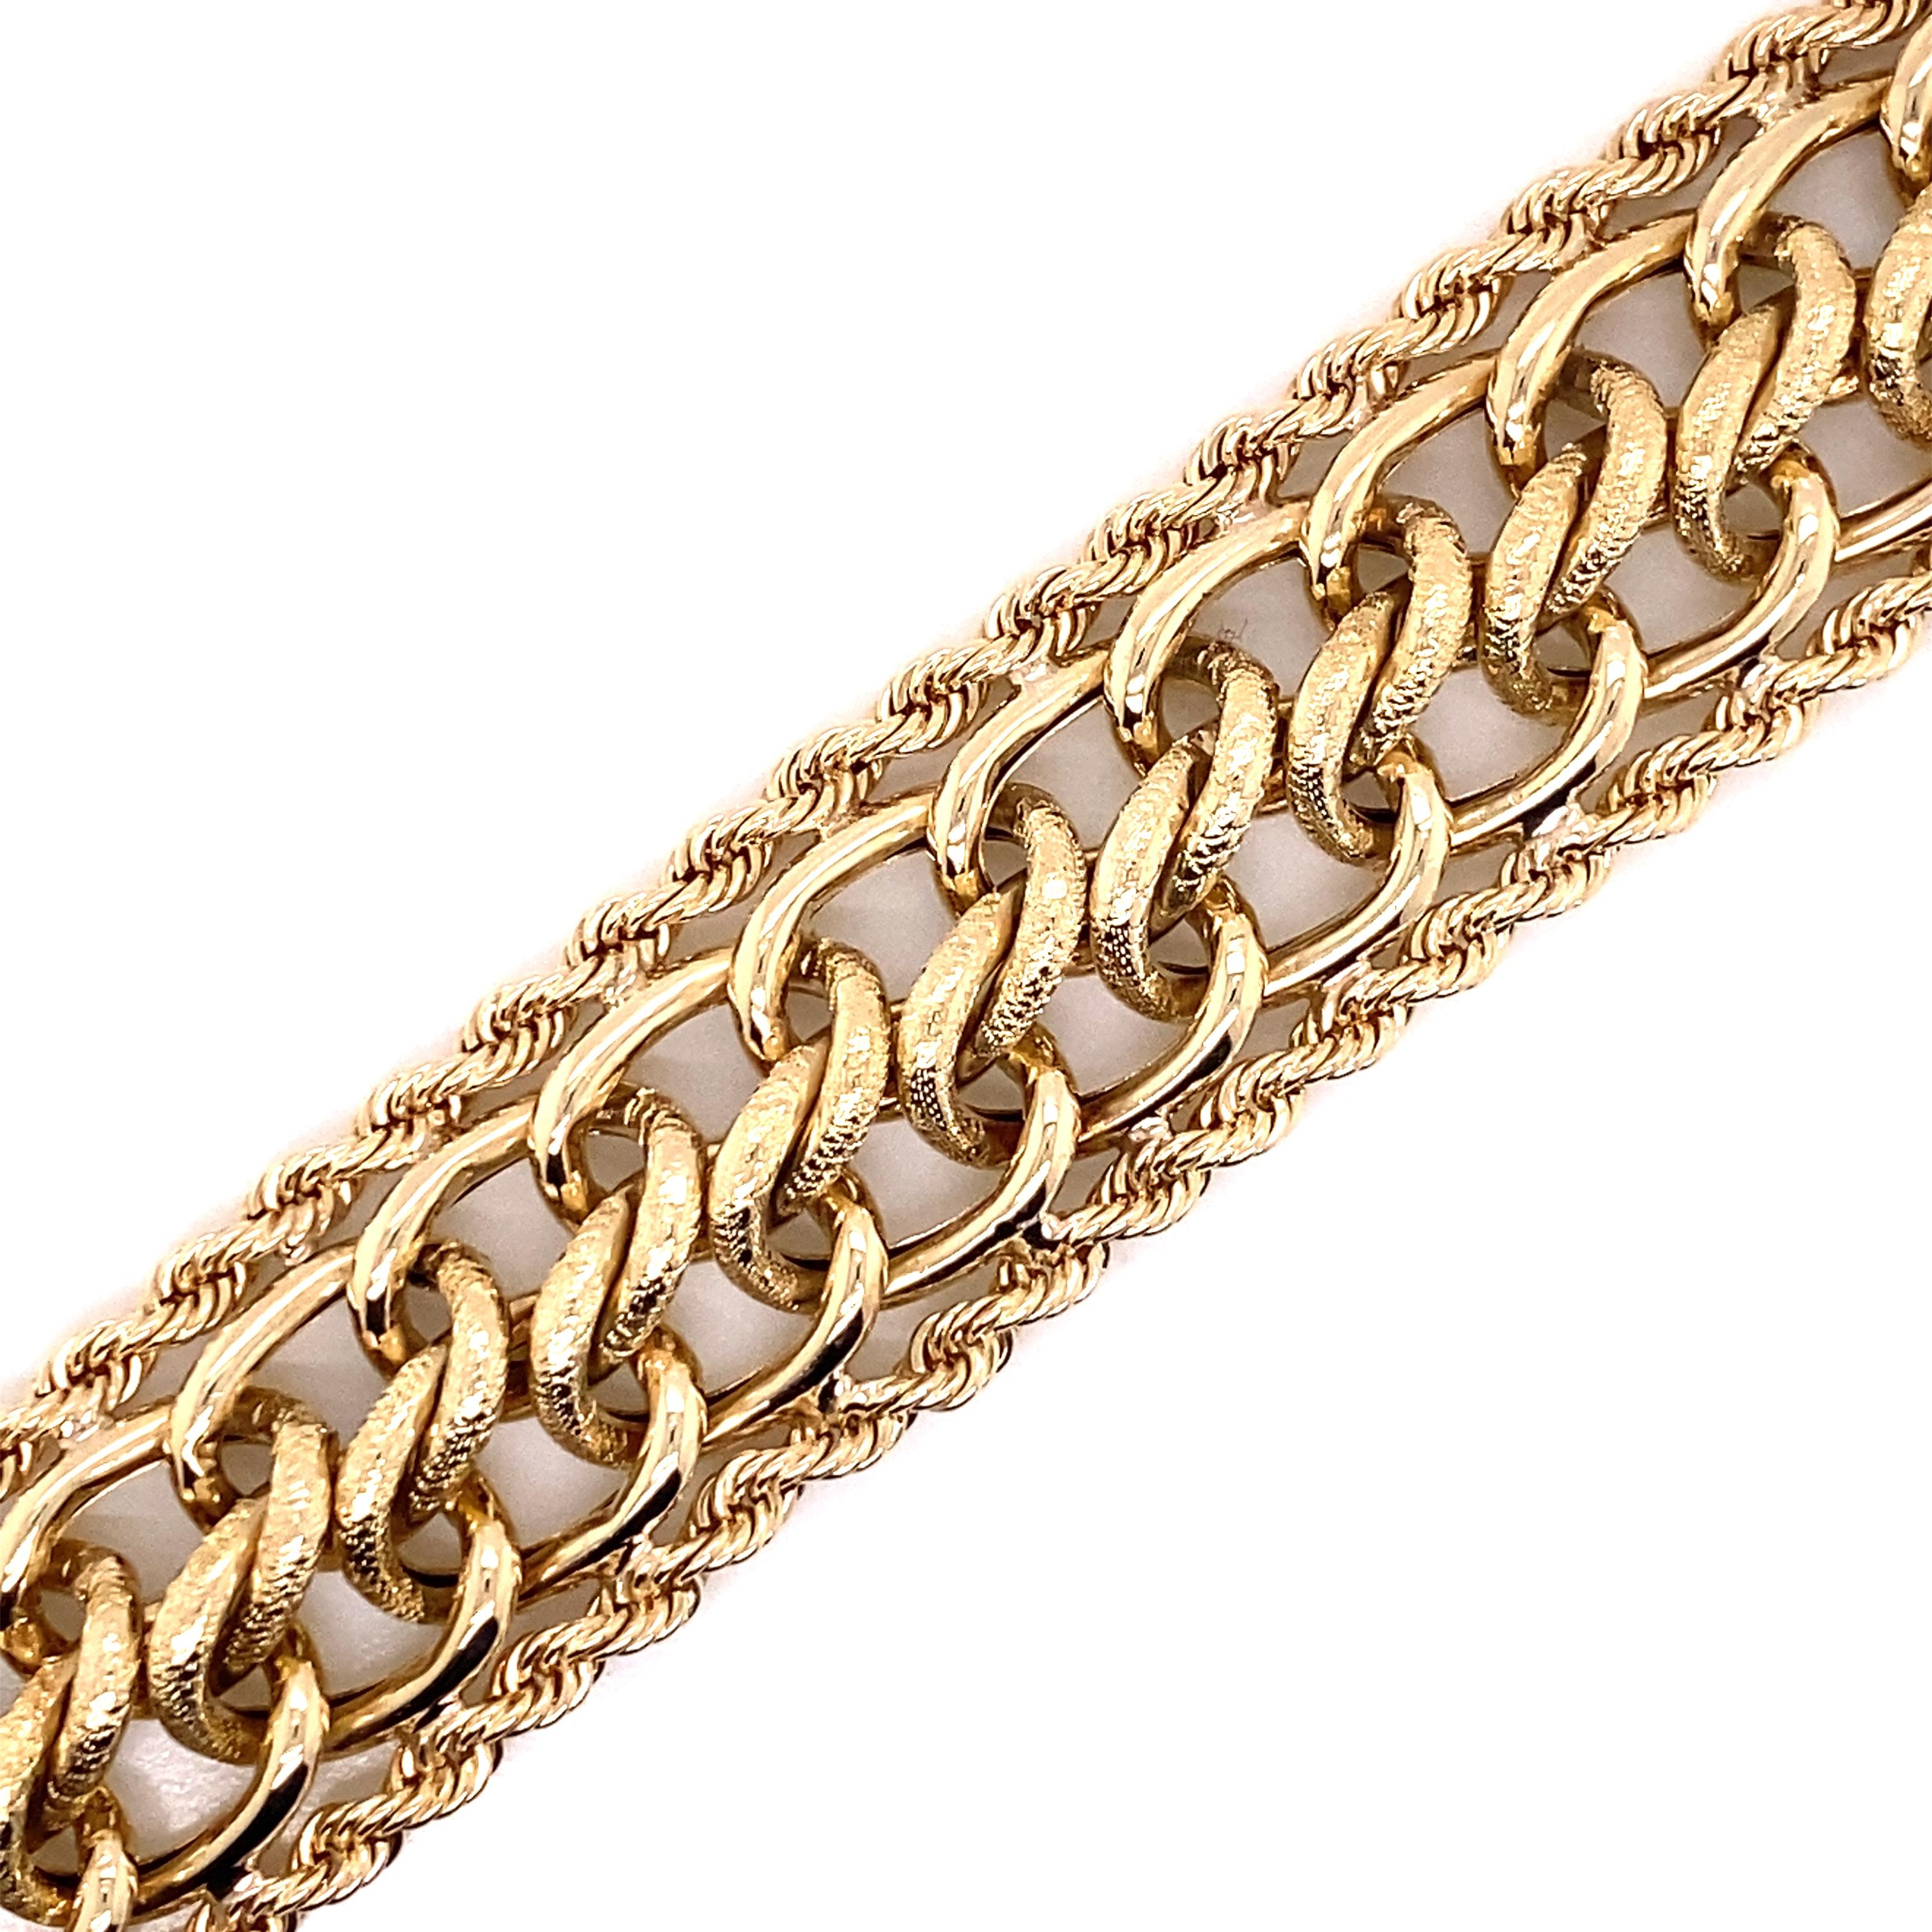 Modern Vintage 1980's 14k Yellow Gold Wide Link with Rope Edge Bracelet